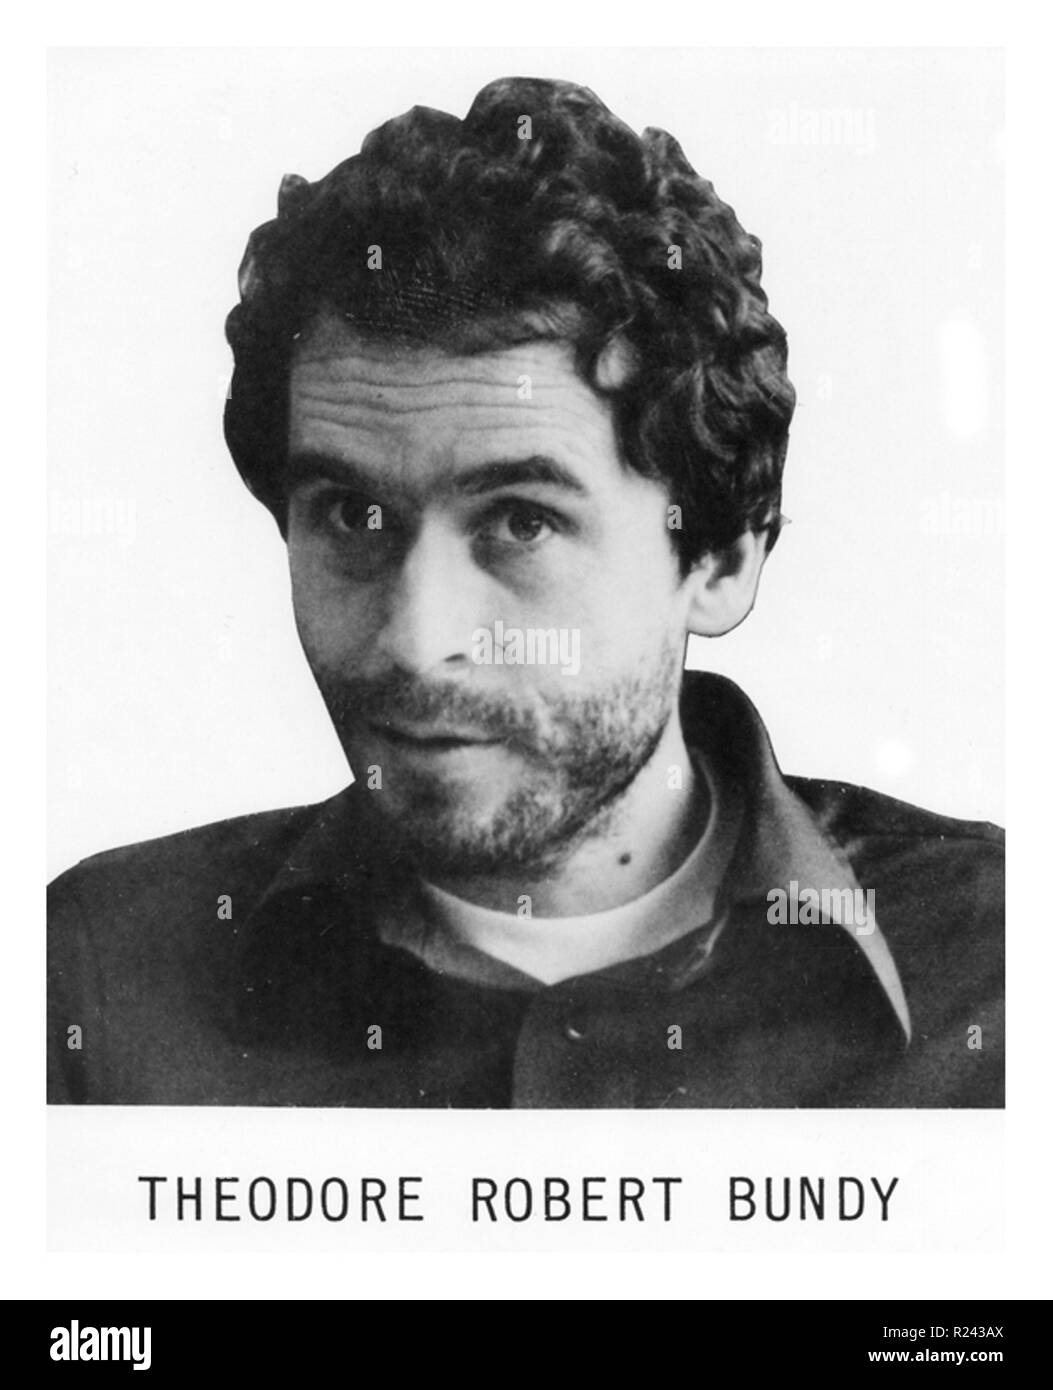 FBI wanted poster for Theodore Robert 'Ted' Bundy (born Theodore Robert Cowell; November 24, 1946 - January 24, 1989) was an American serial killer, kidnapper, rapist, and necrophile who assaulted and murdered numerous young women and girls during the 1970s and possibly earlier. Shortly before his execution, after more than a decade of denials, he confessed to 30 homicides committed in seven states between 1974 and 1978 Stock Photo